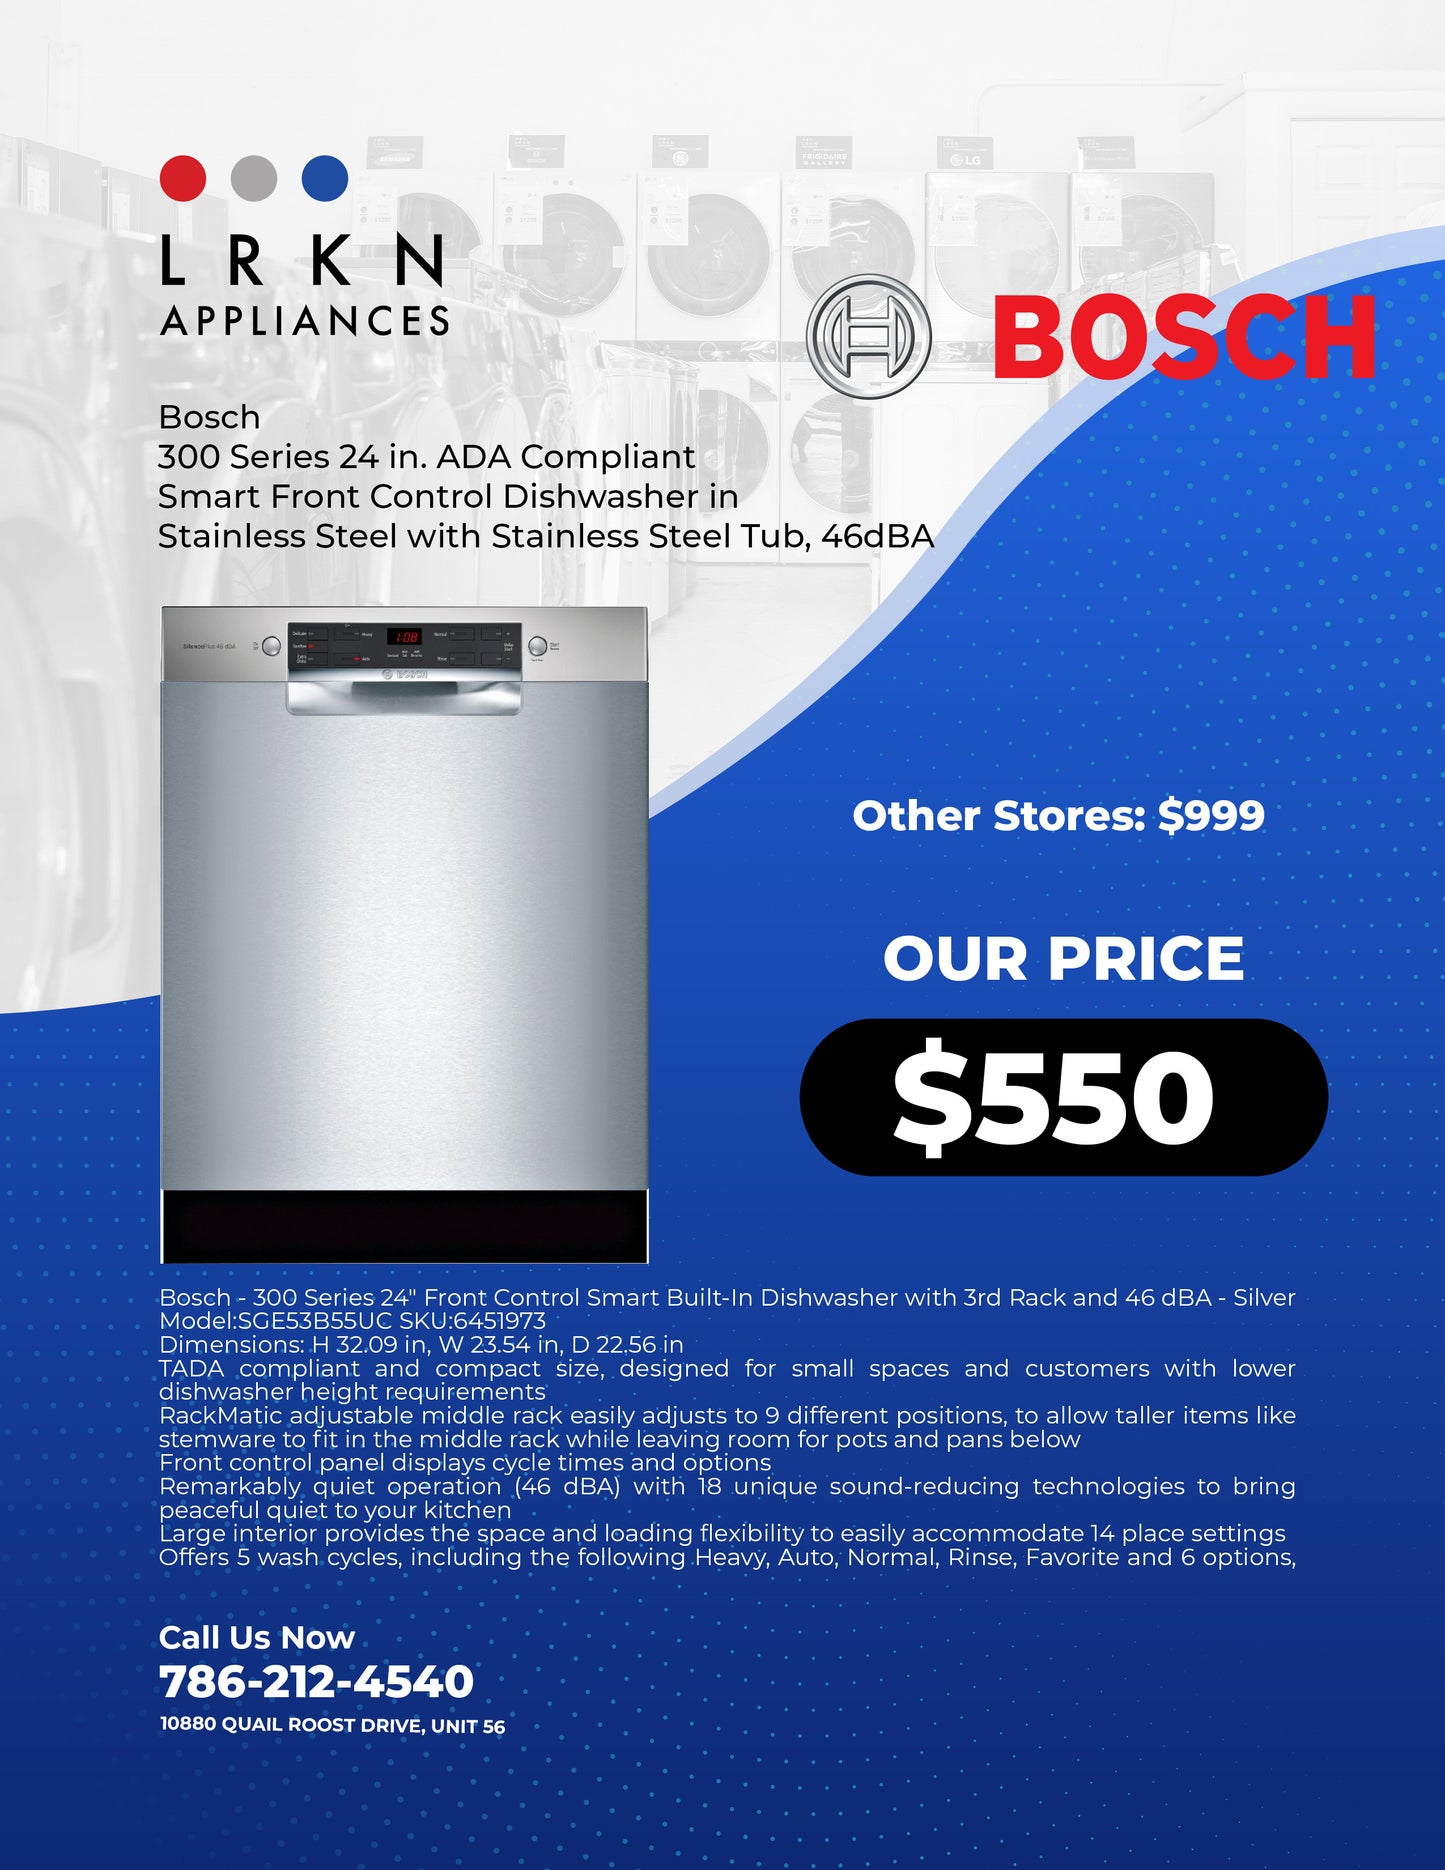 BOSCH NEW DISHWASHER 300 SERIES 24 INCHES ADA COMPLIANT